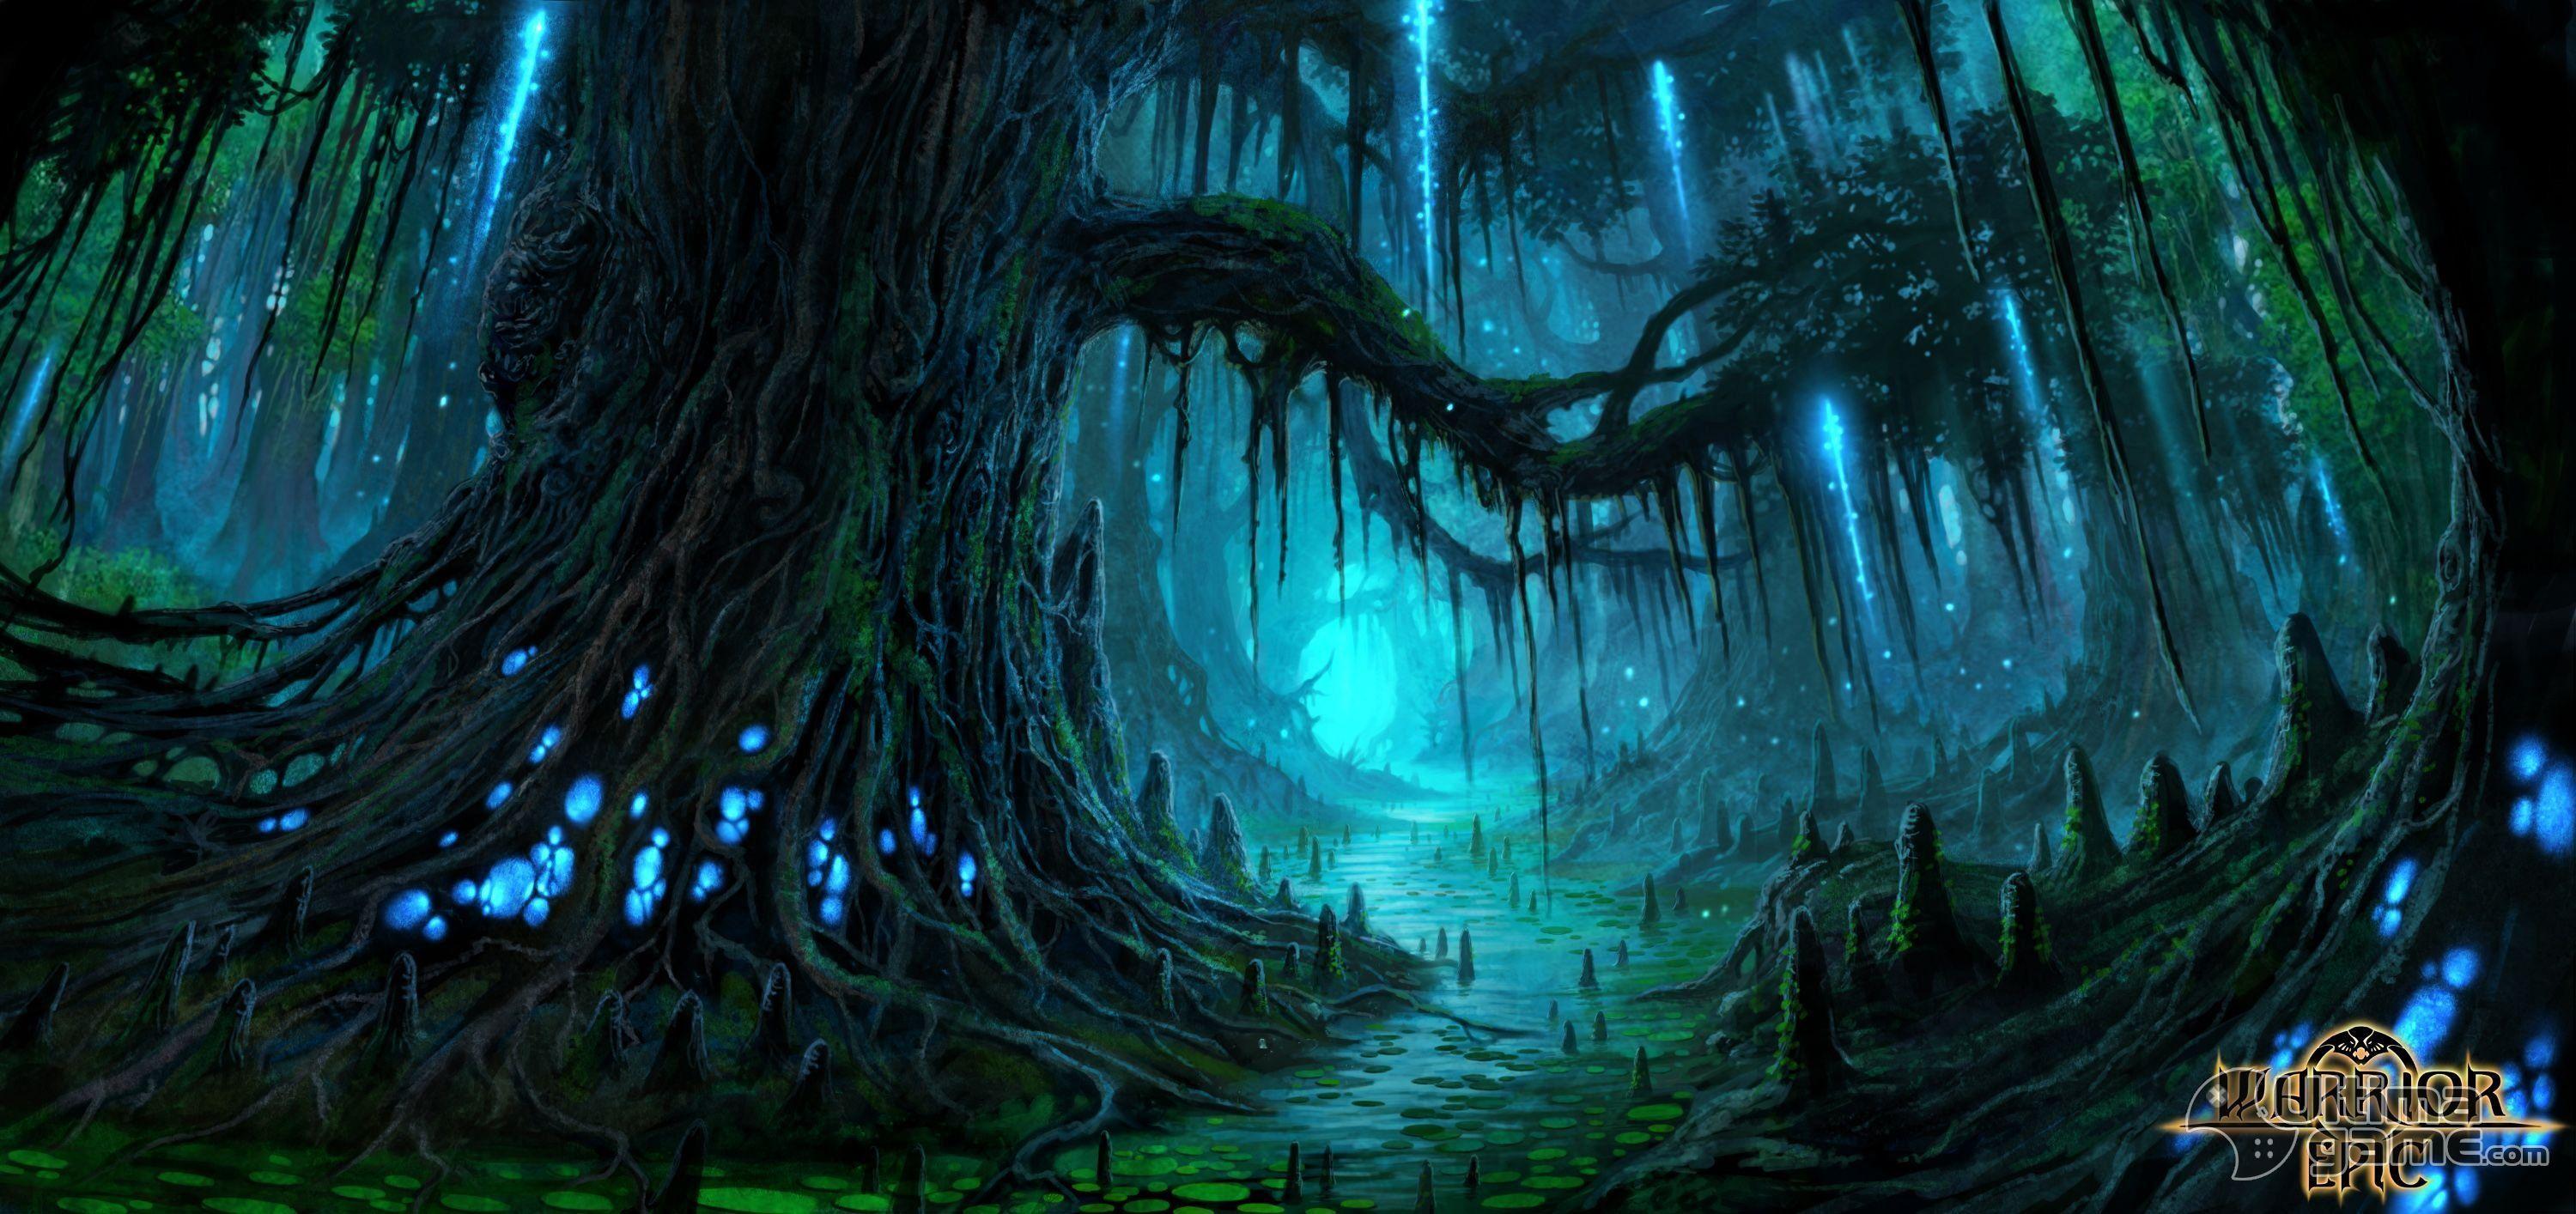 Share more than 68 fantasy forest wallpaper best - in.cdgdbentre